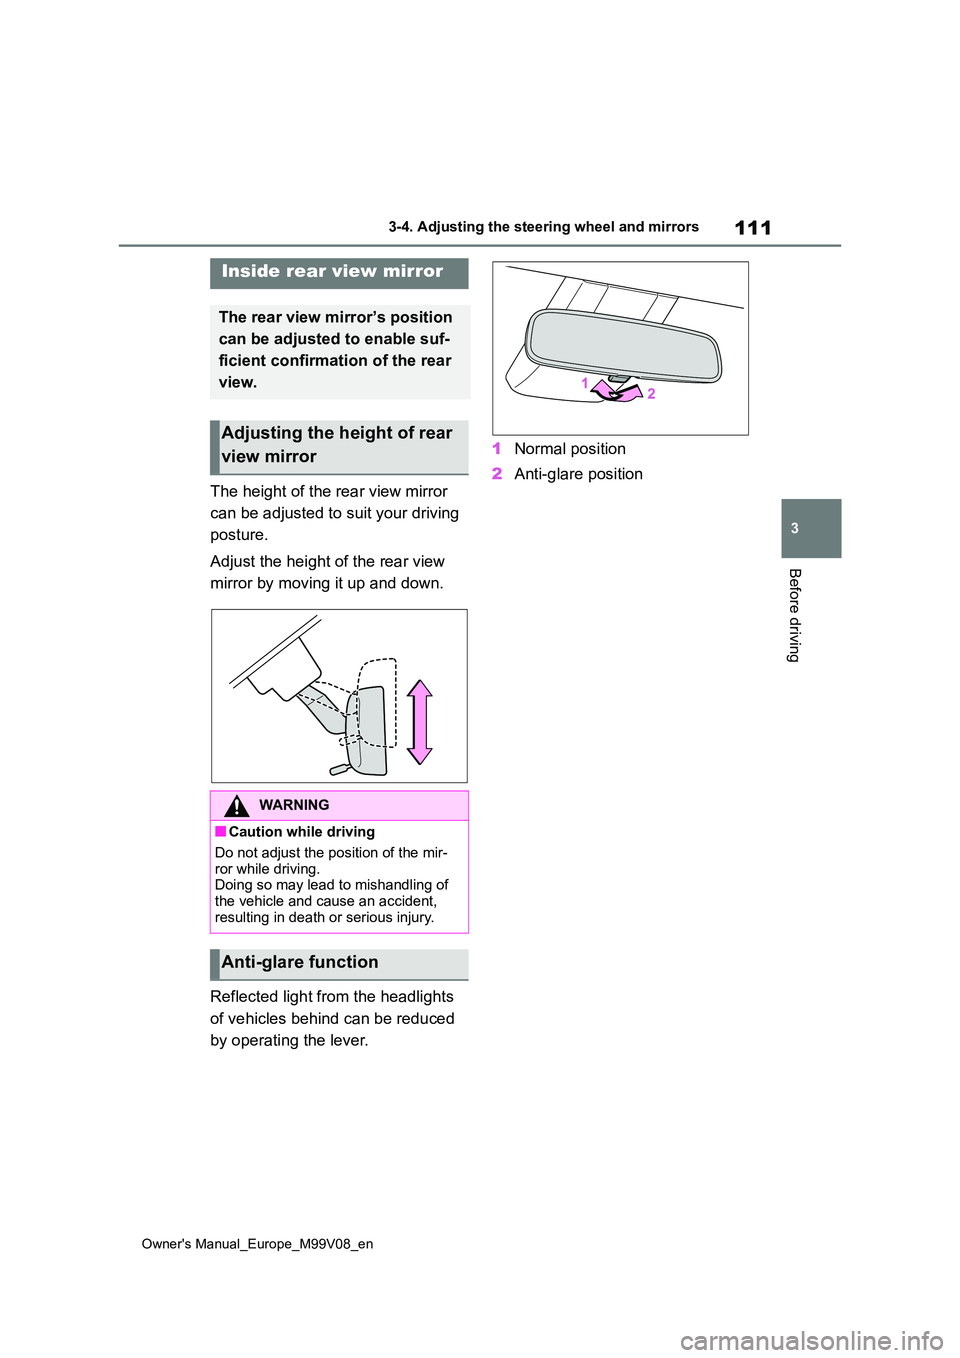 TOYOTA AYGO X 2022  Owners Manual (in English) 111
3
Owner's Manual_Europe_M99V08_en
3-4. Adjusting the steering wheel and mirrors
Before driving
The height of the rear view mirror  
can be adjusted to suit your driving  
posture. 
Adjust the 